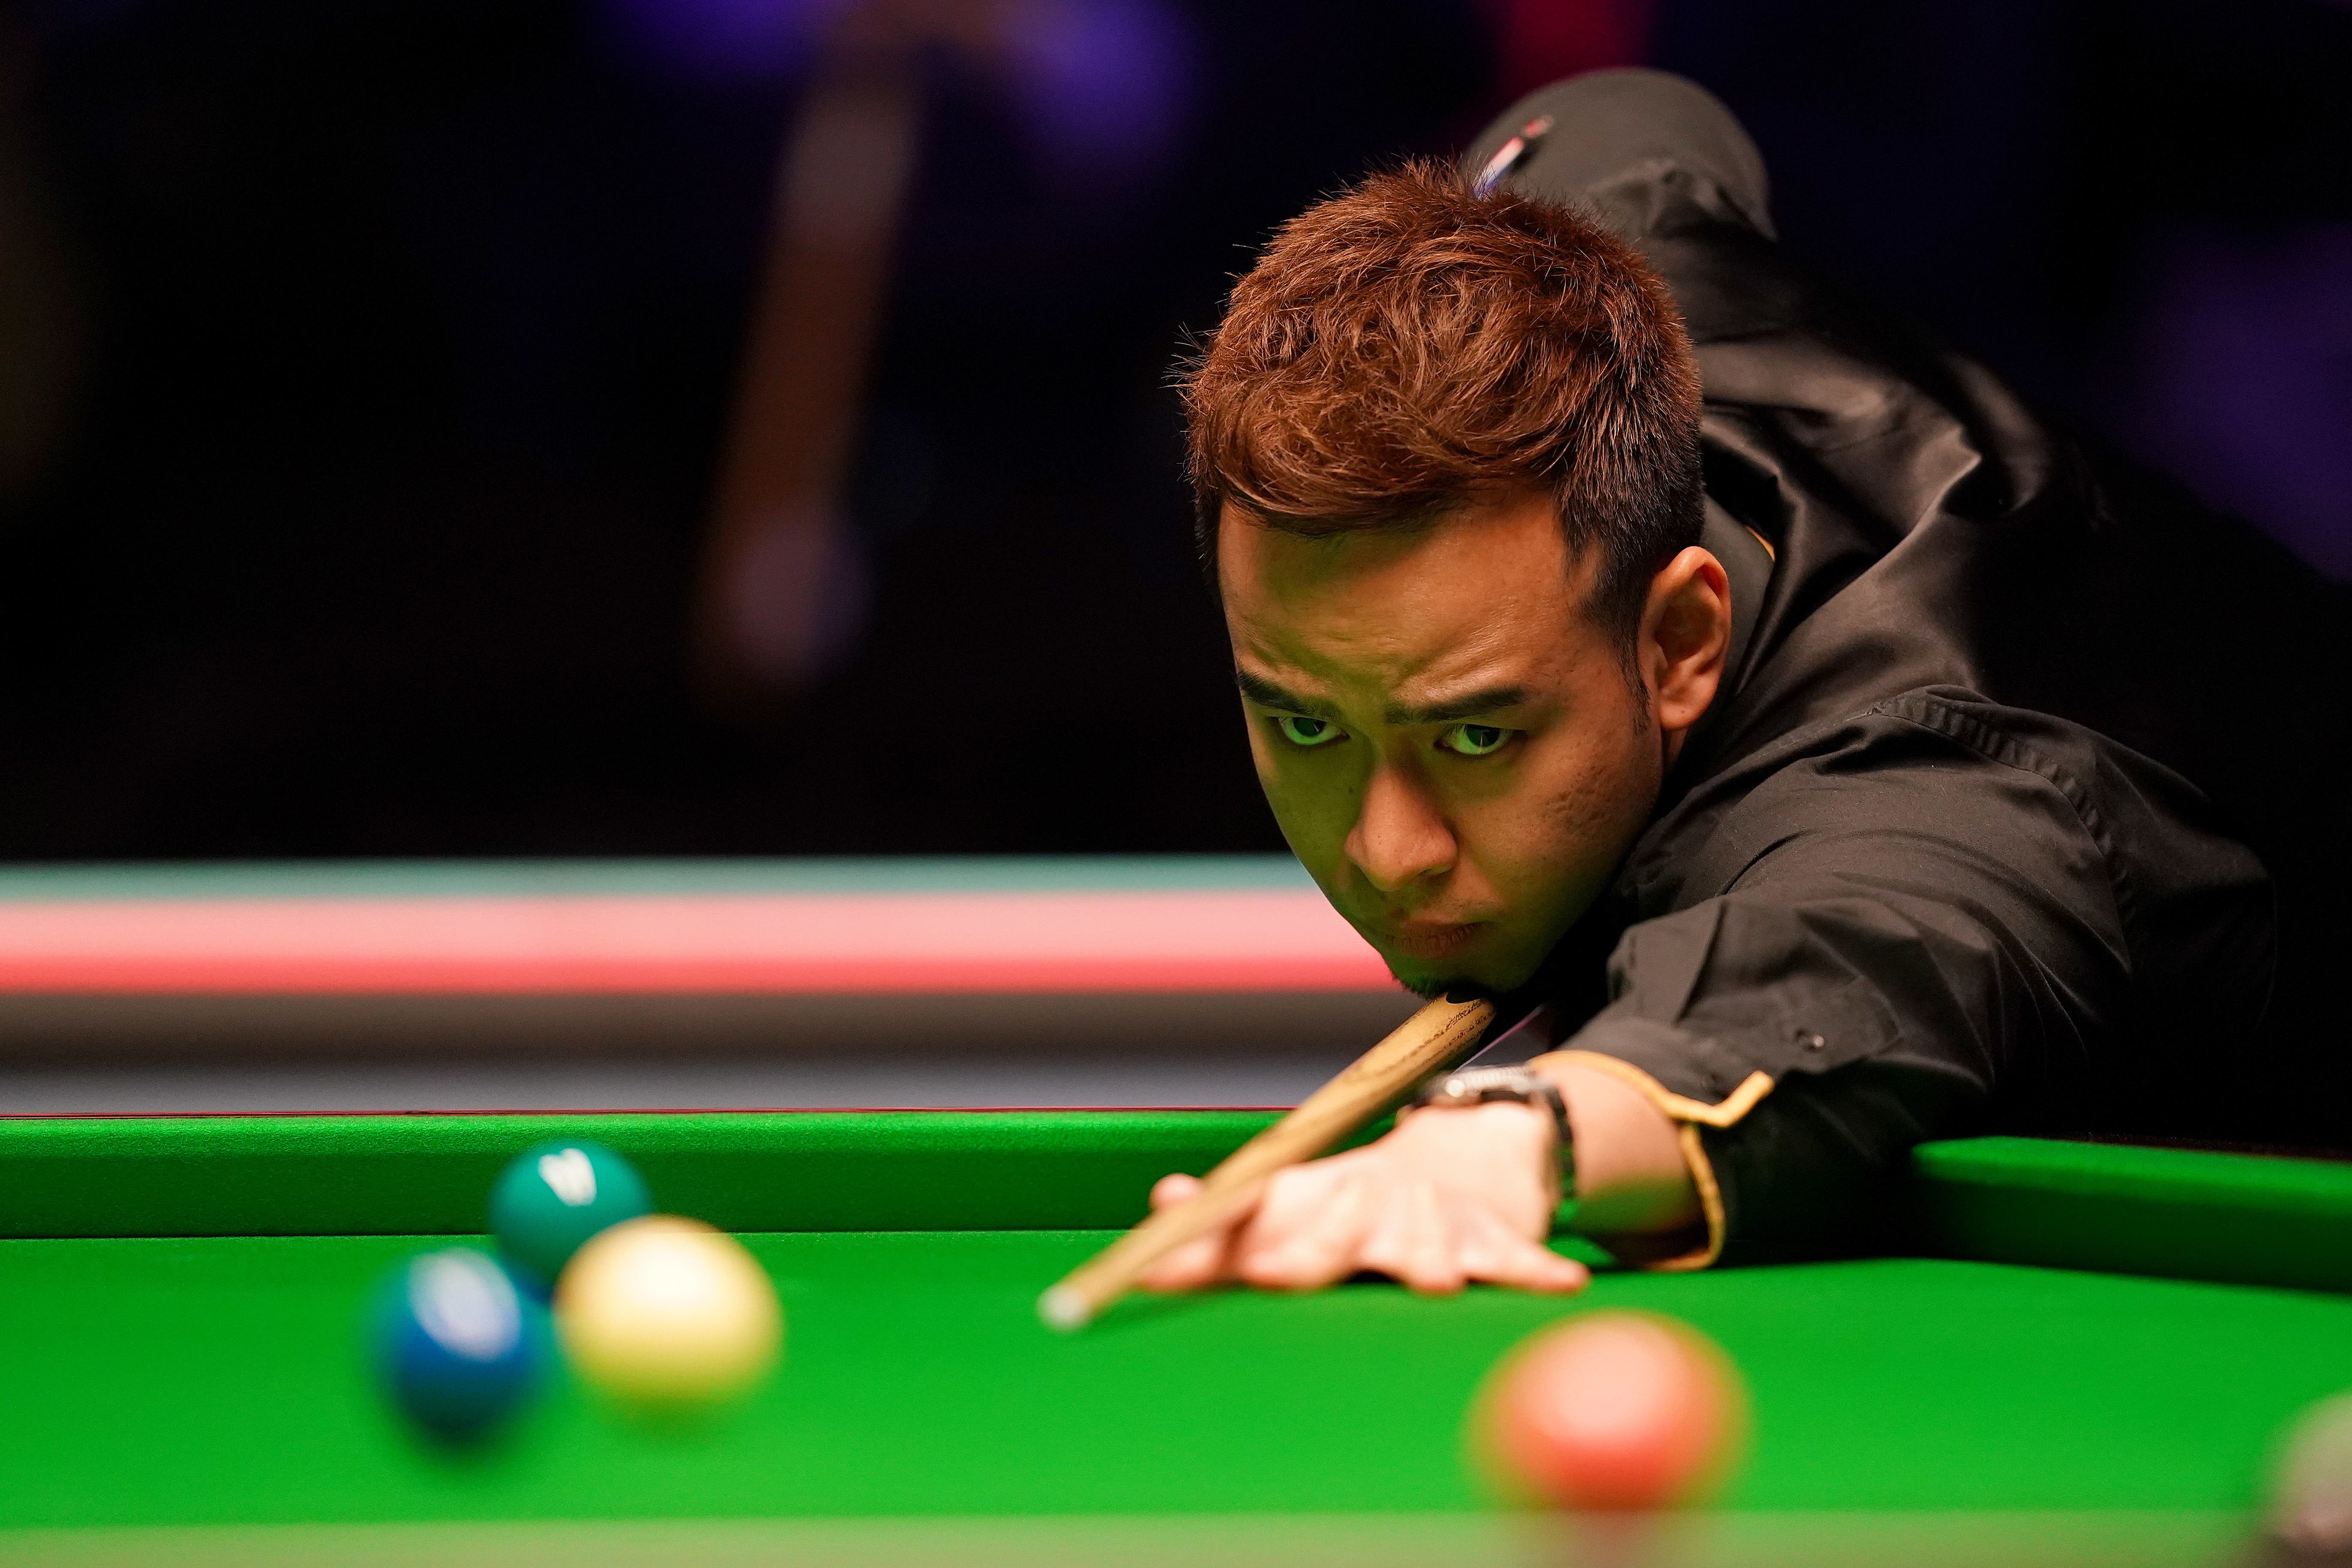 Noppon Saengkham, pictured, beat Ronnie O’Sullivan for the first time (Martin Rickett/PA)